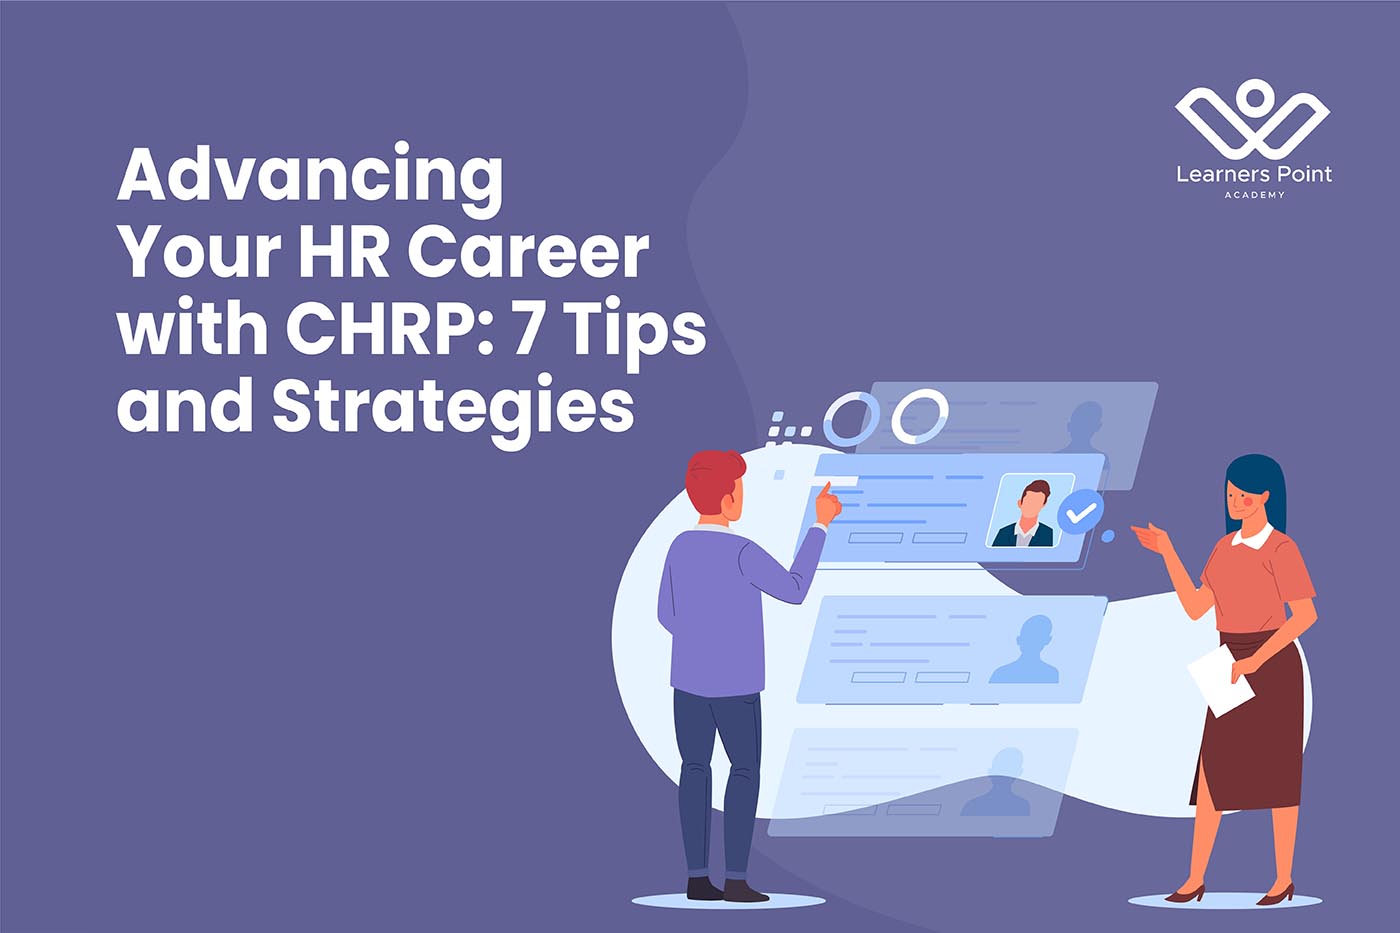 Advancing Your HR Career with CHRP: 7 Tips and Strategies